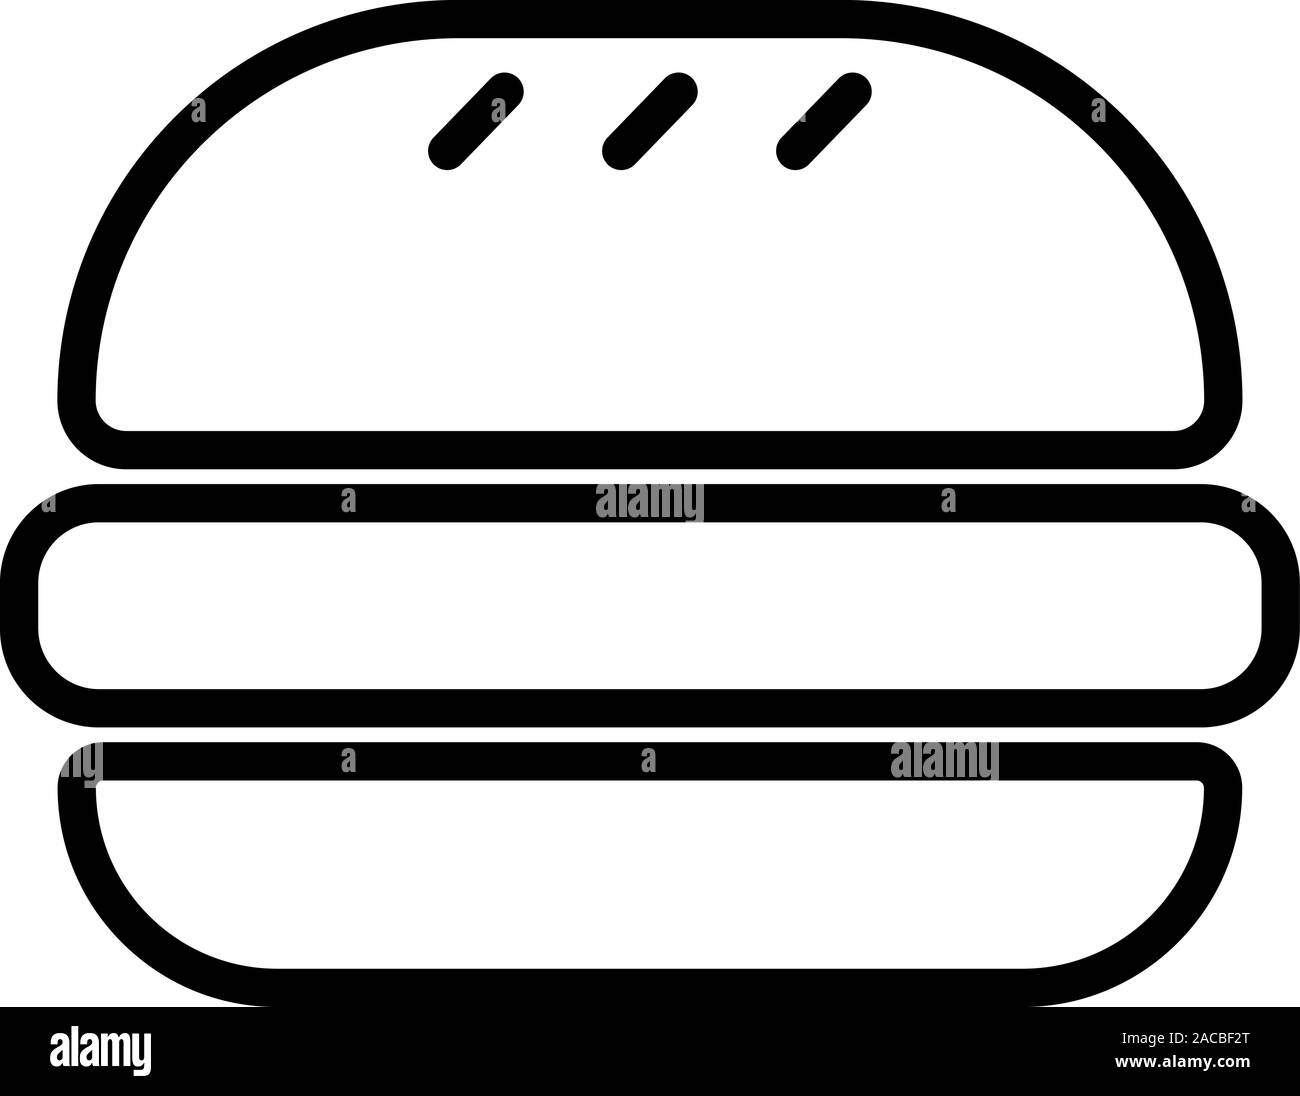 Black outlined symbol of a hamburger, isolated on white background. Stock Vector